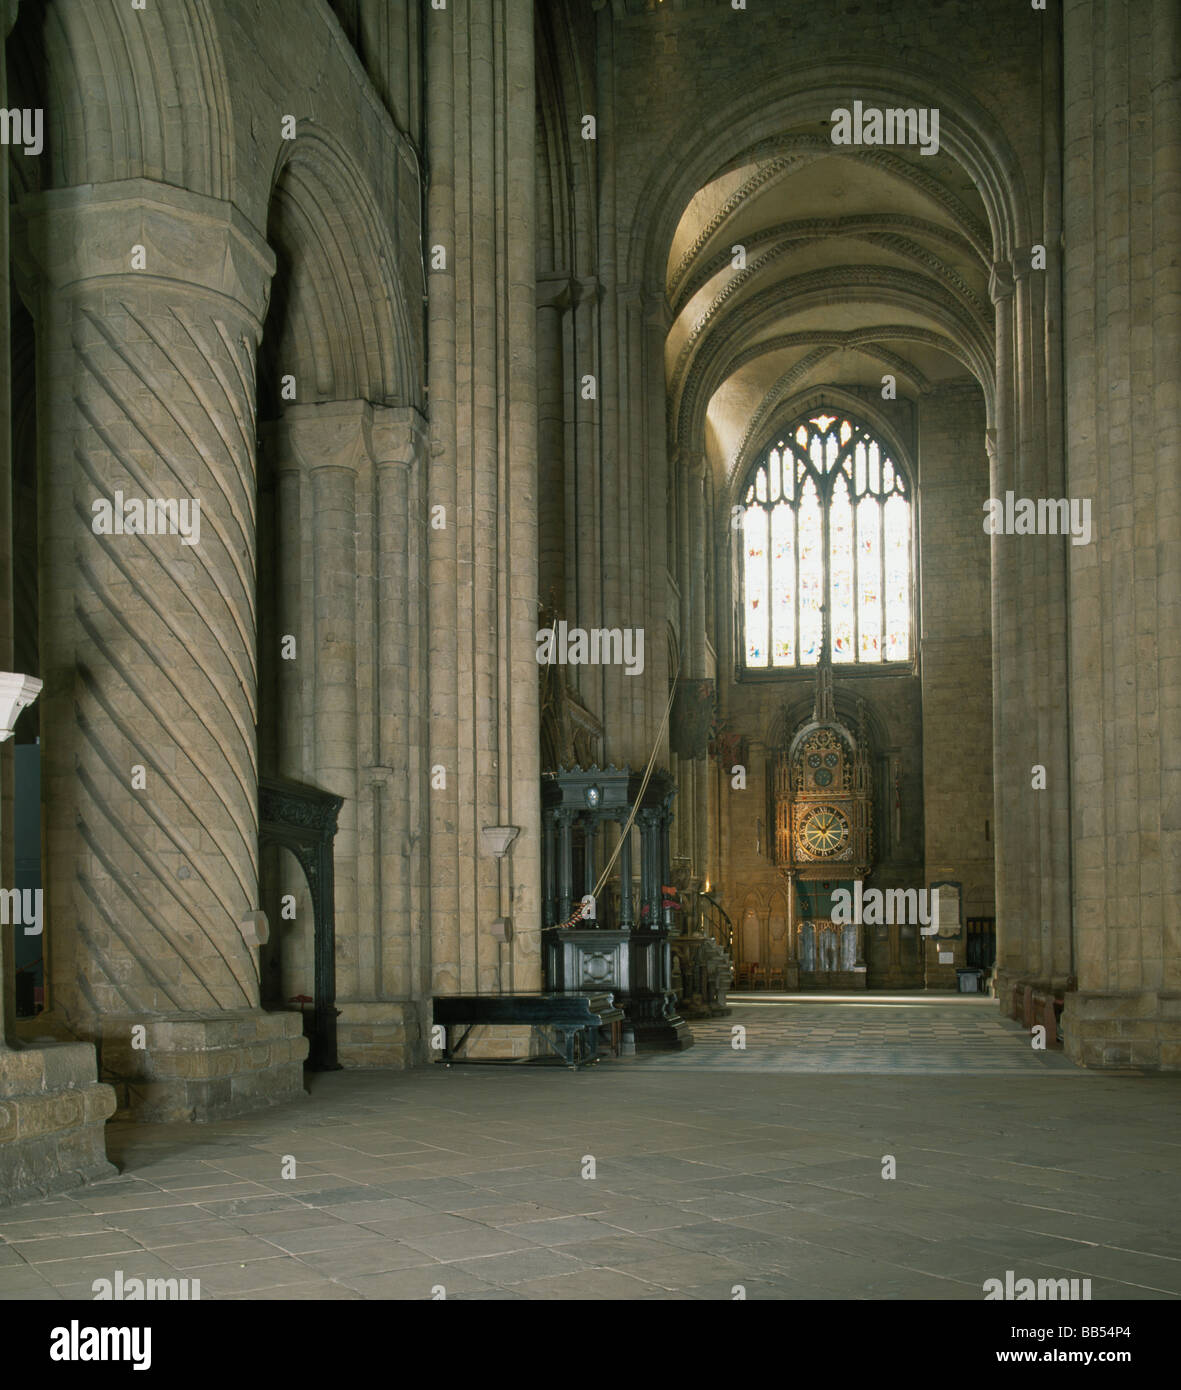 Durham Cathedral south transept with zig-zag pattern in the vaulting Stock Photo